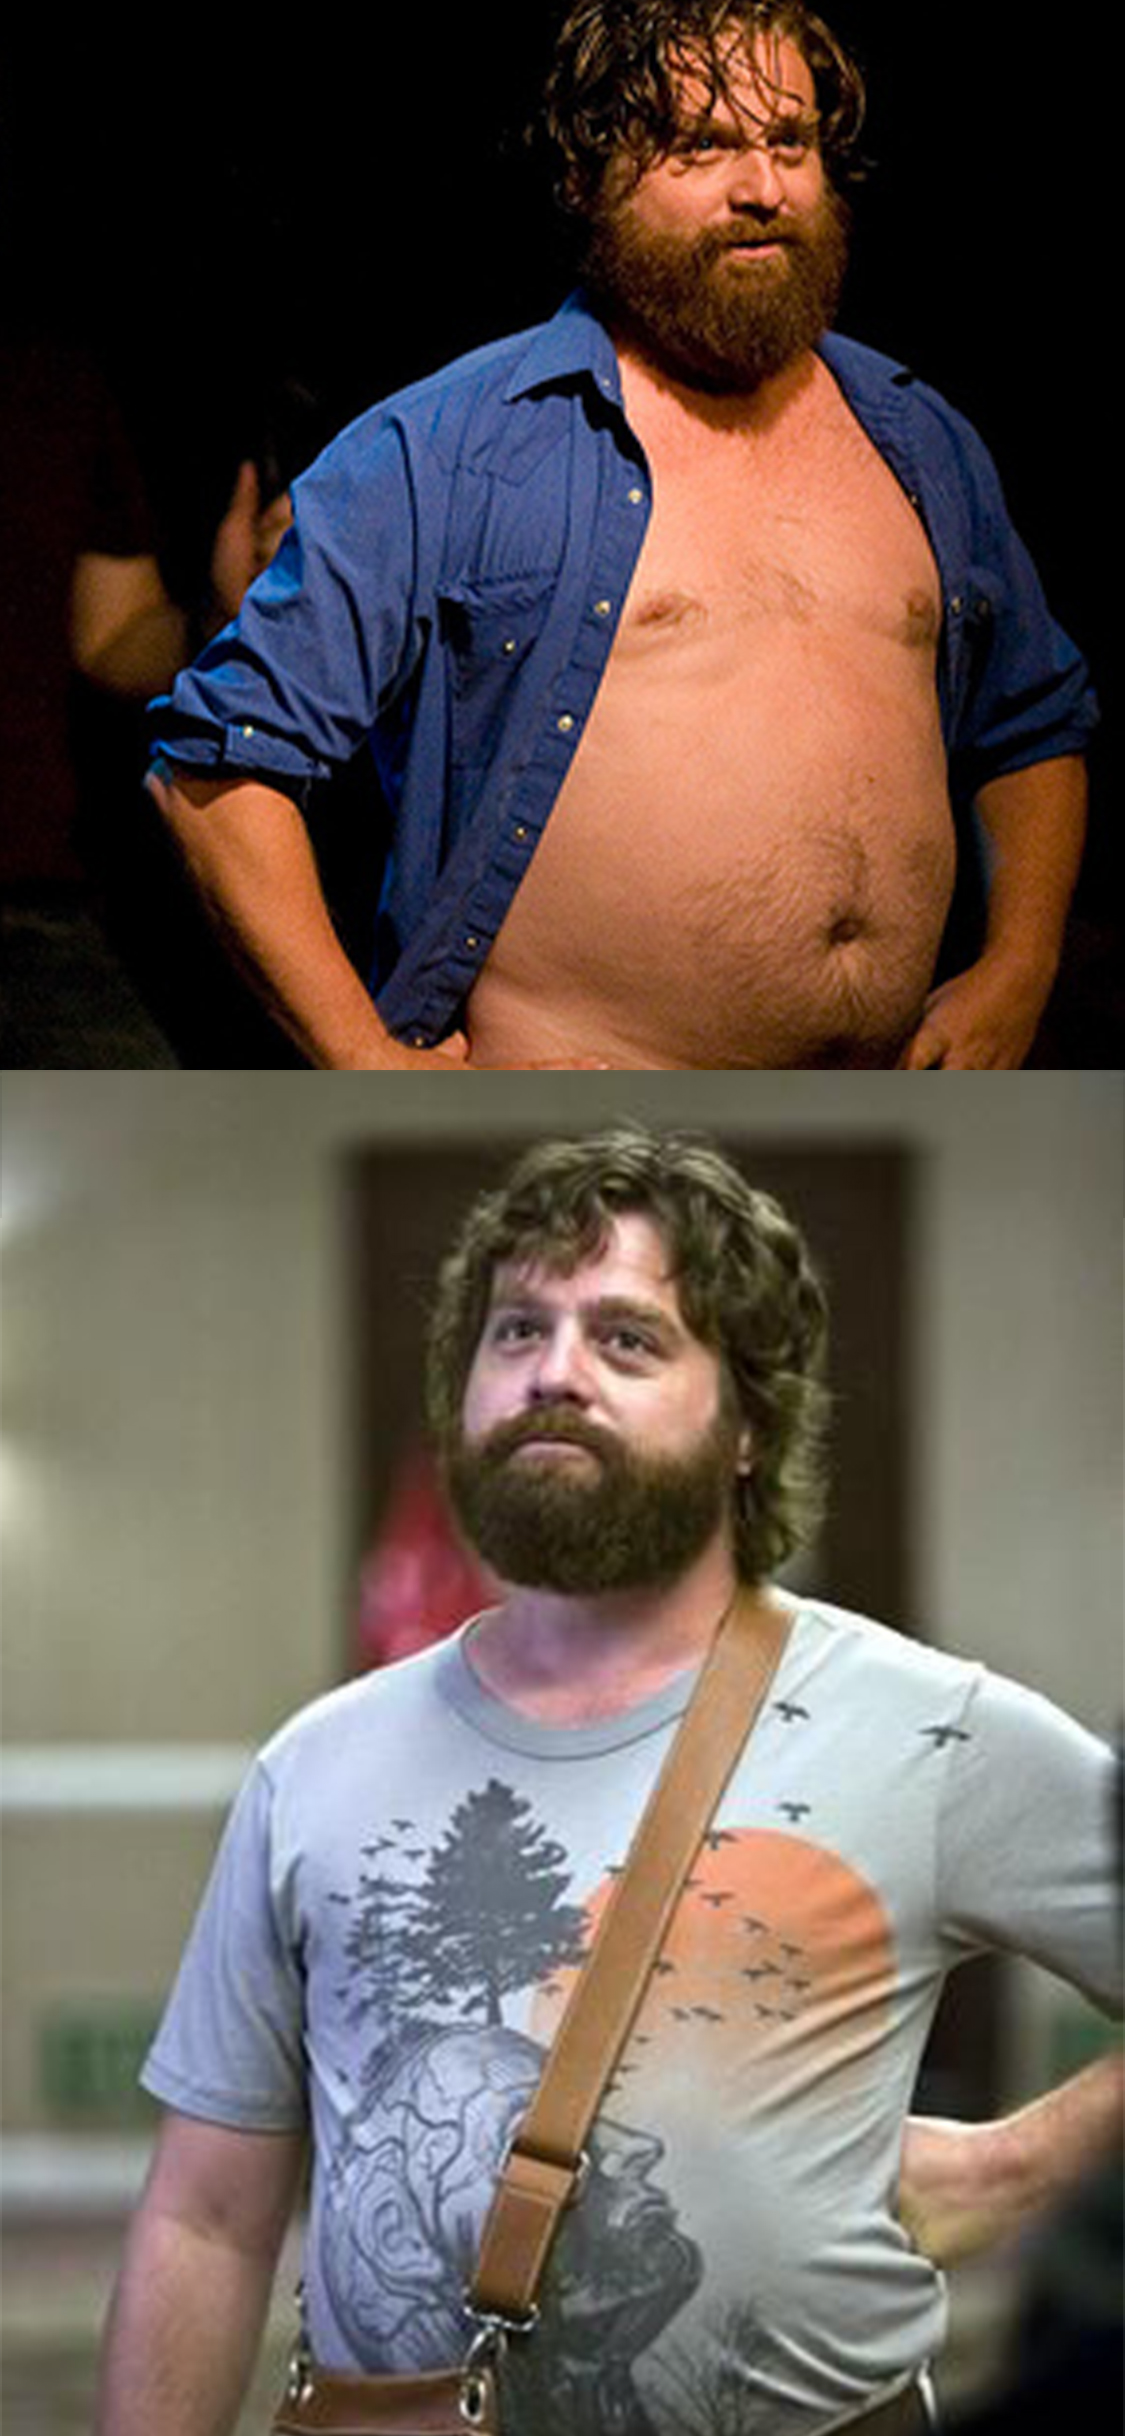 1. Zach Galifianakis Was Sick And Tired Of Being Overweight. 